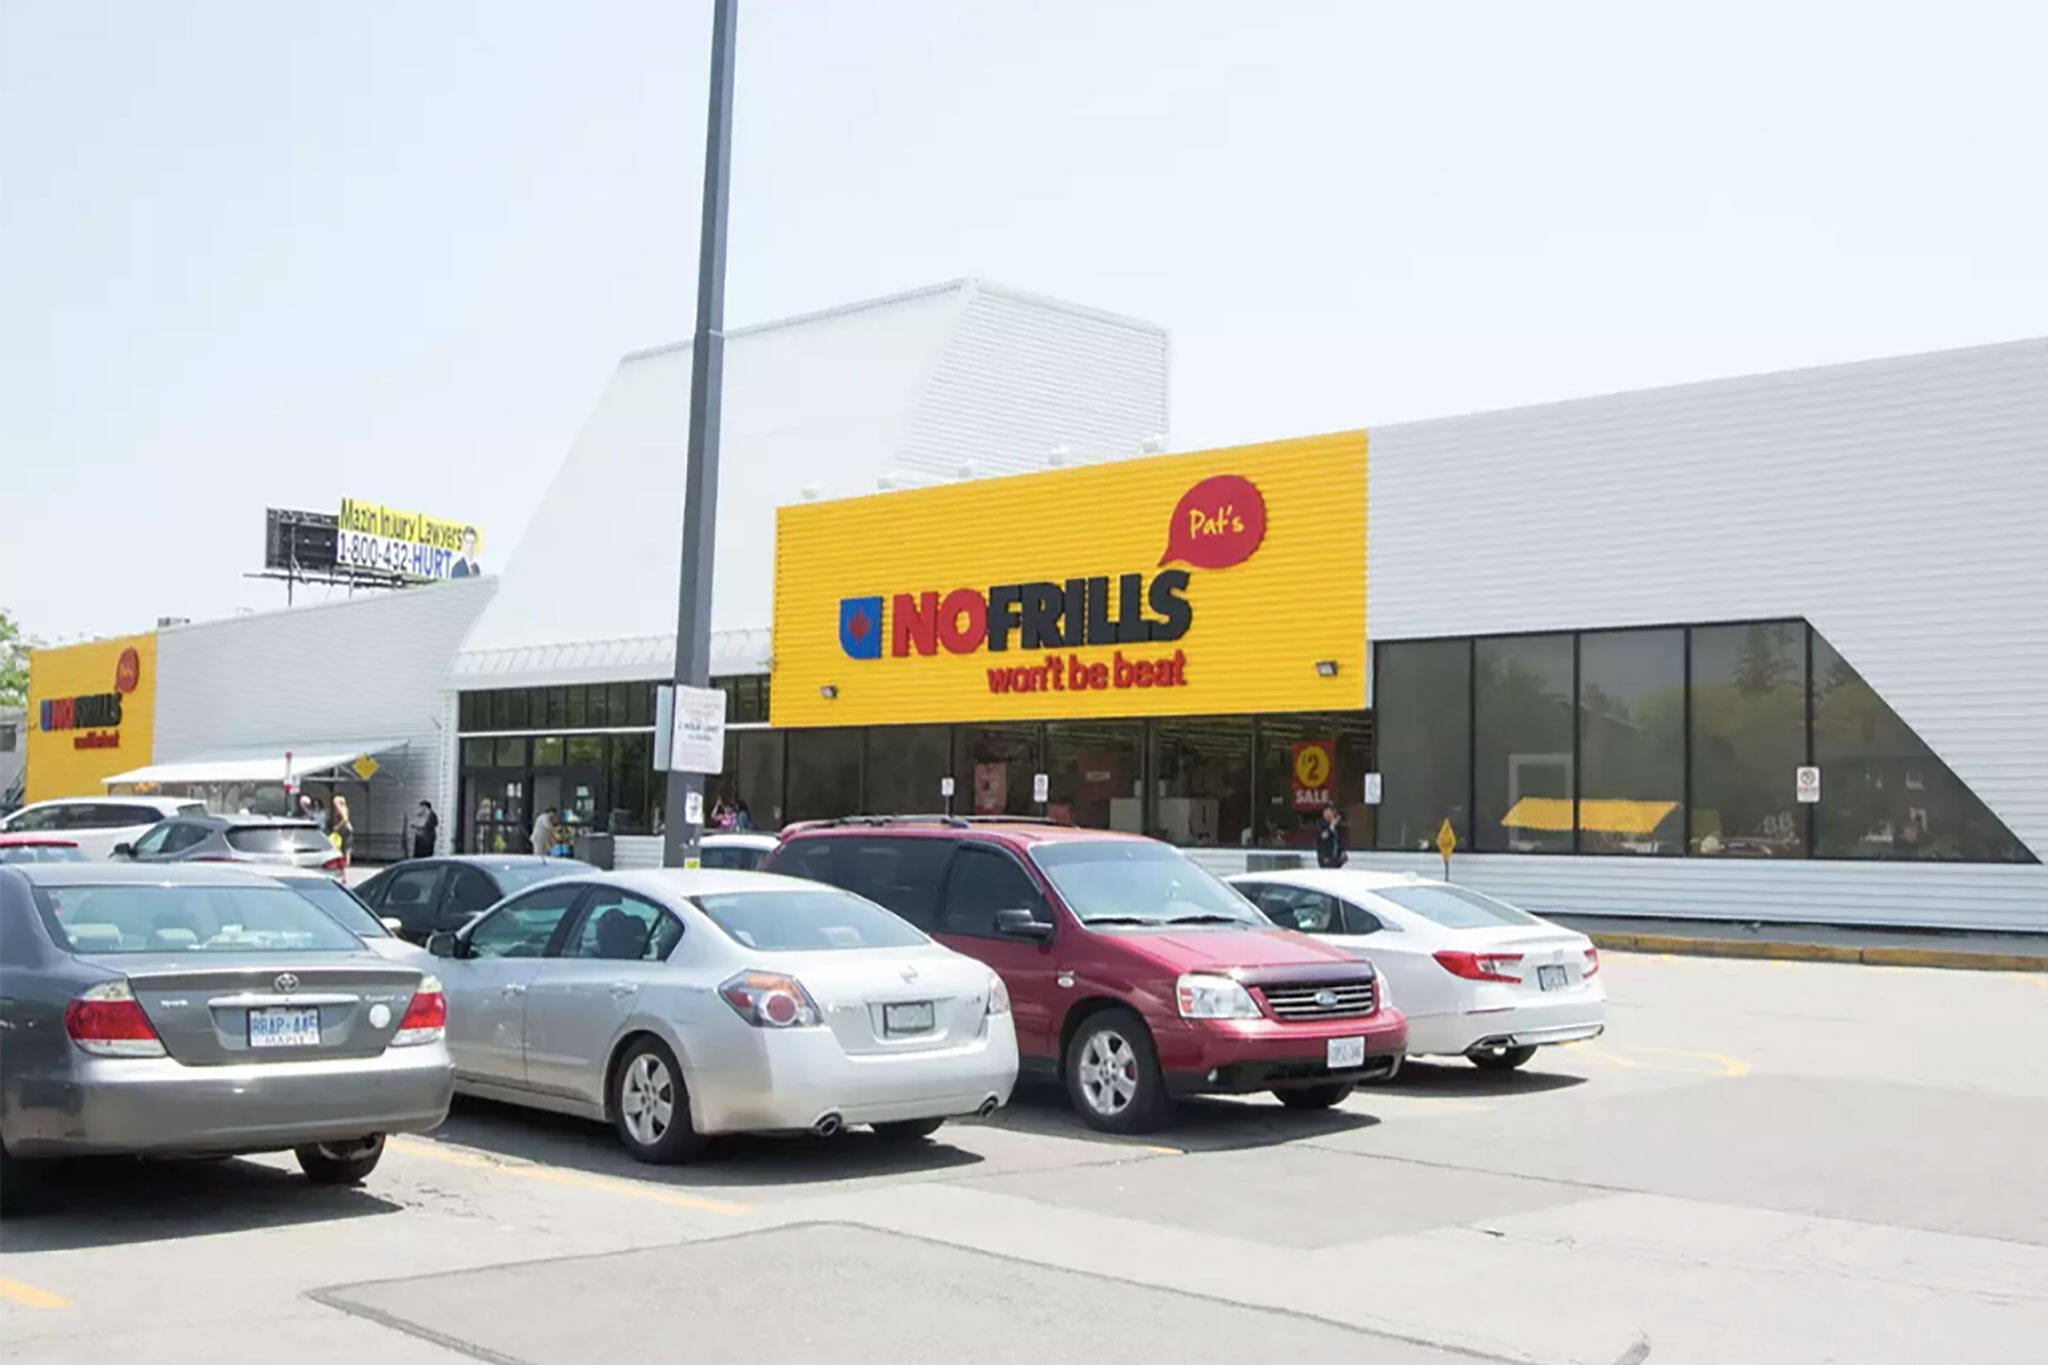 The best and worst No Frills in Toronto